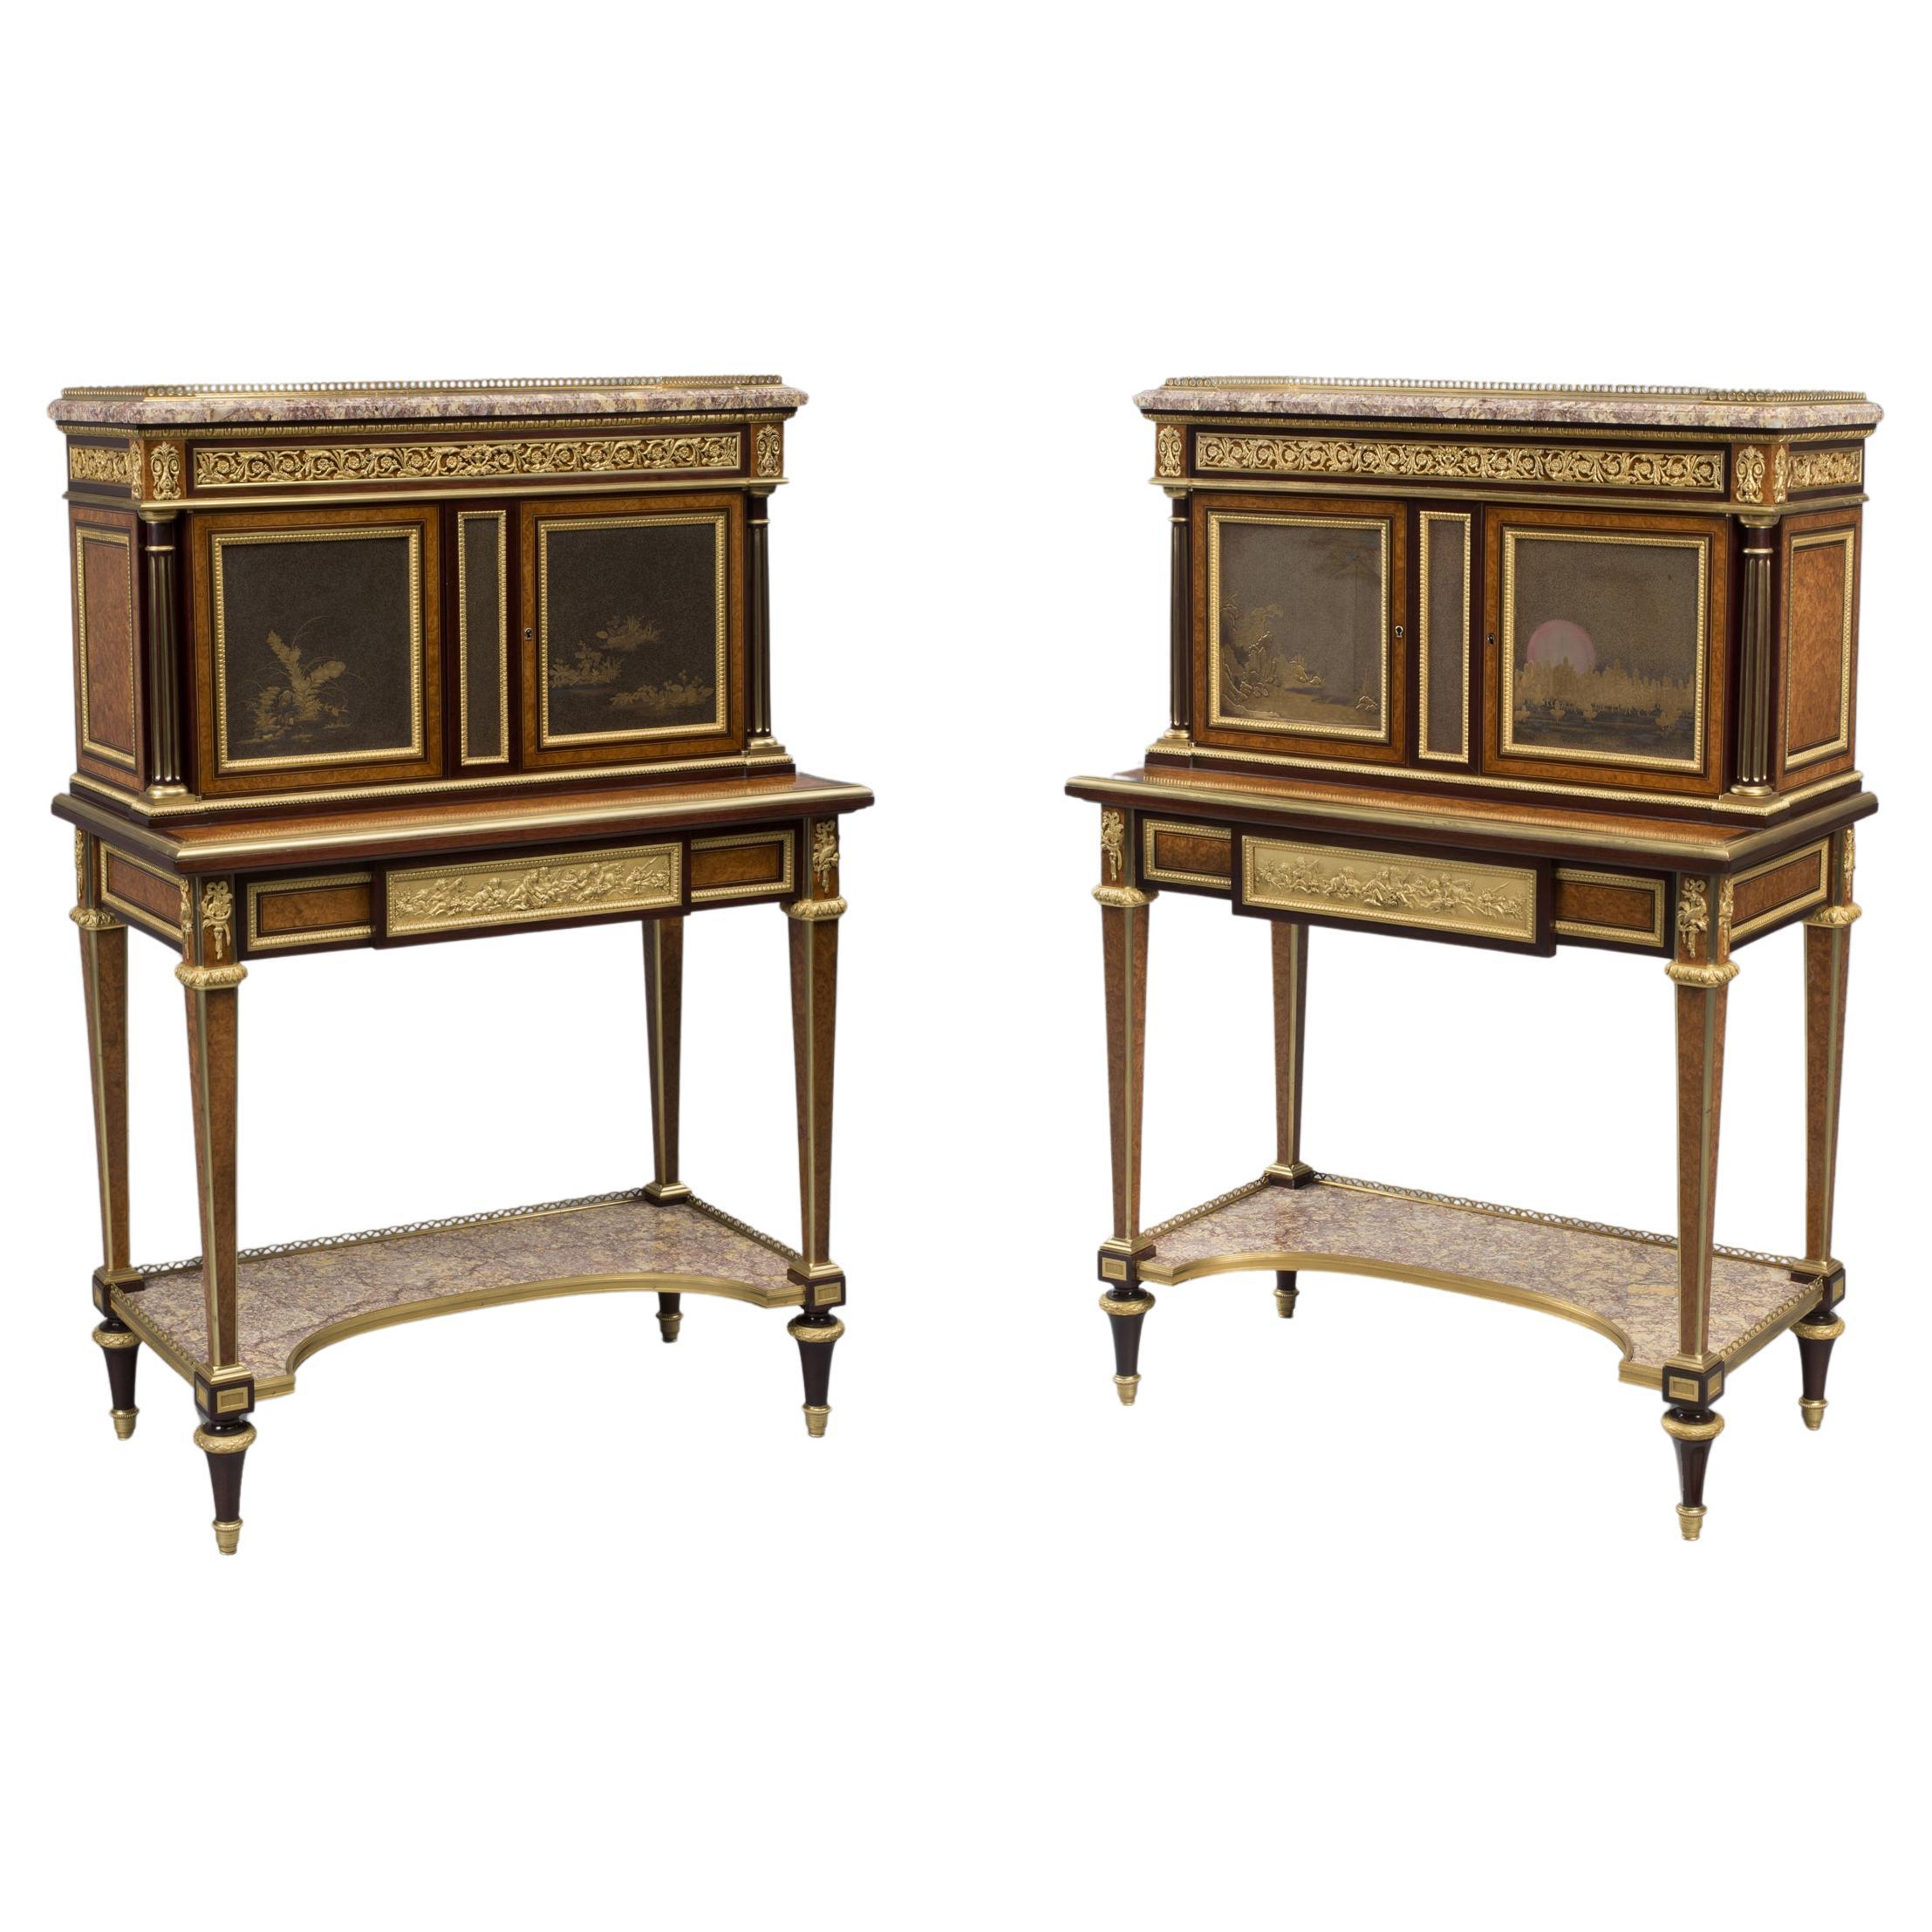 Pair of Bonheur Du Jours With Lacquer Panels, by Henry Dasson